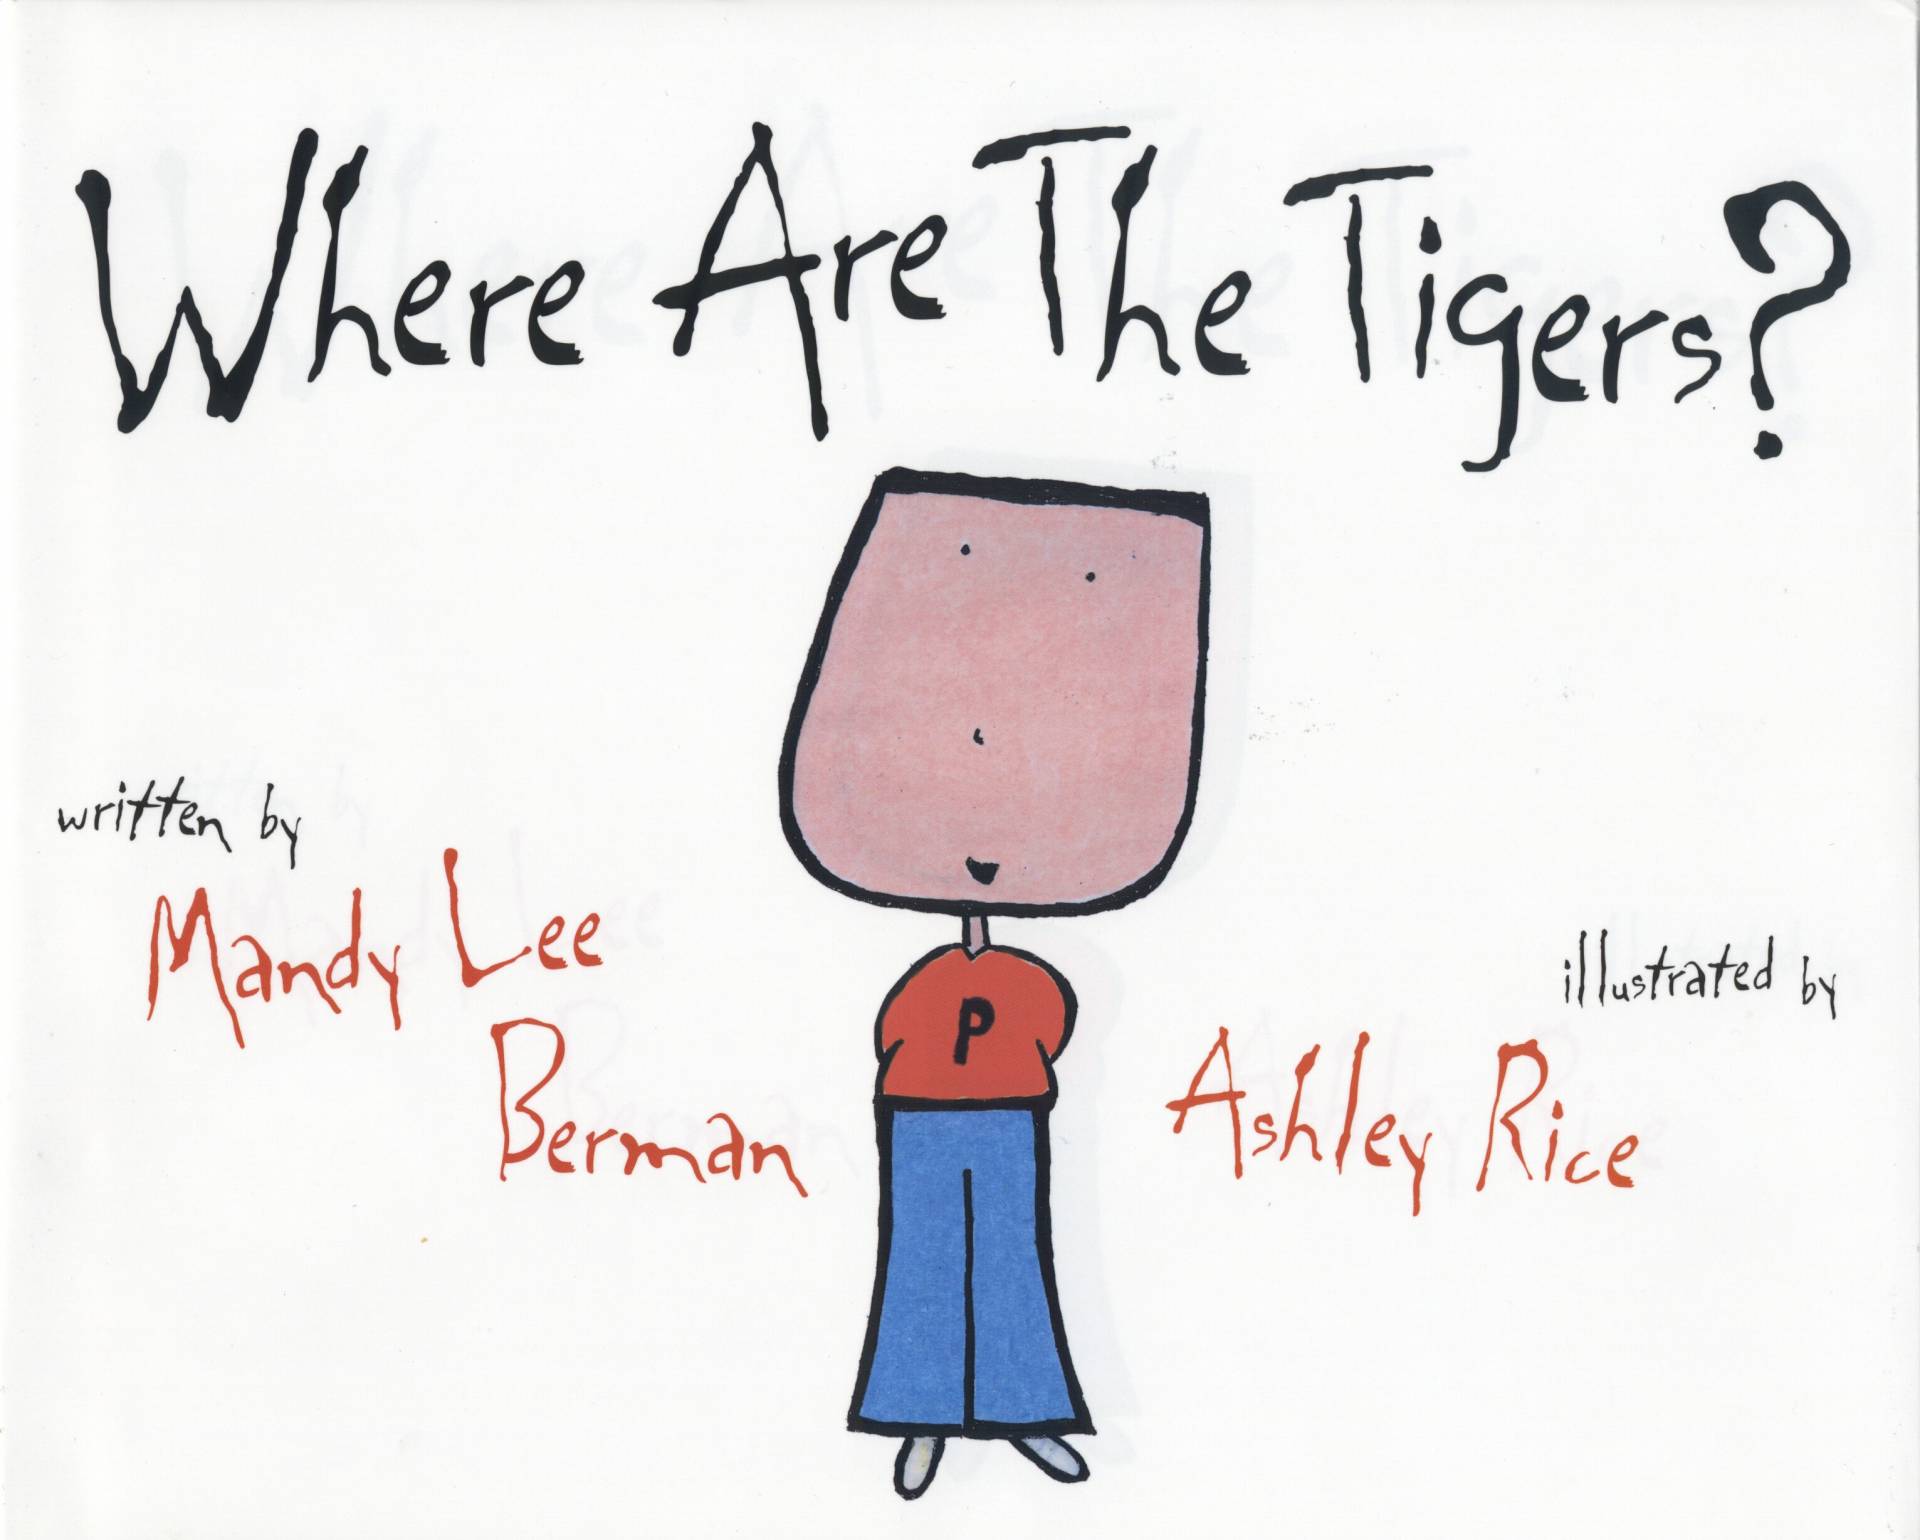 “Where Are the Tigers?"